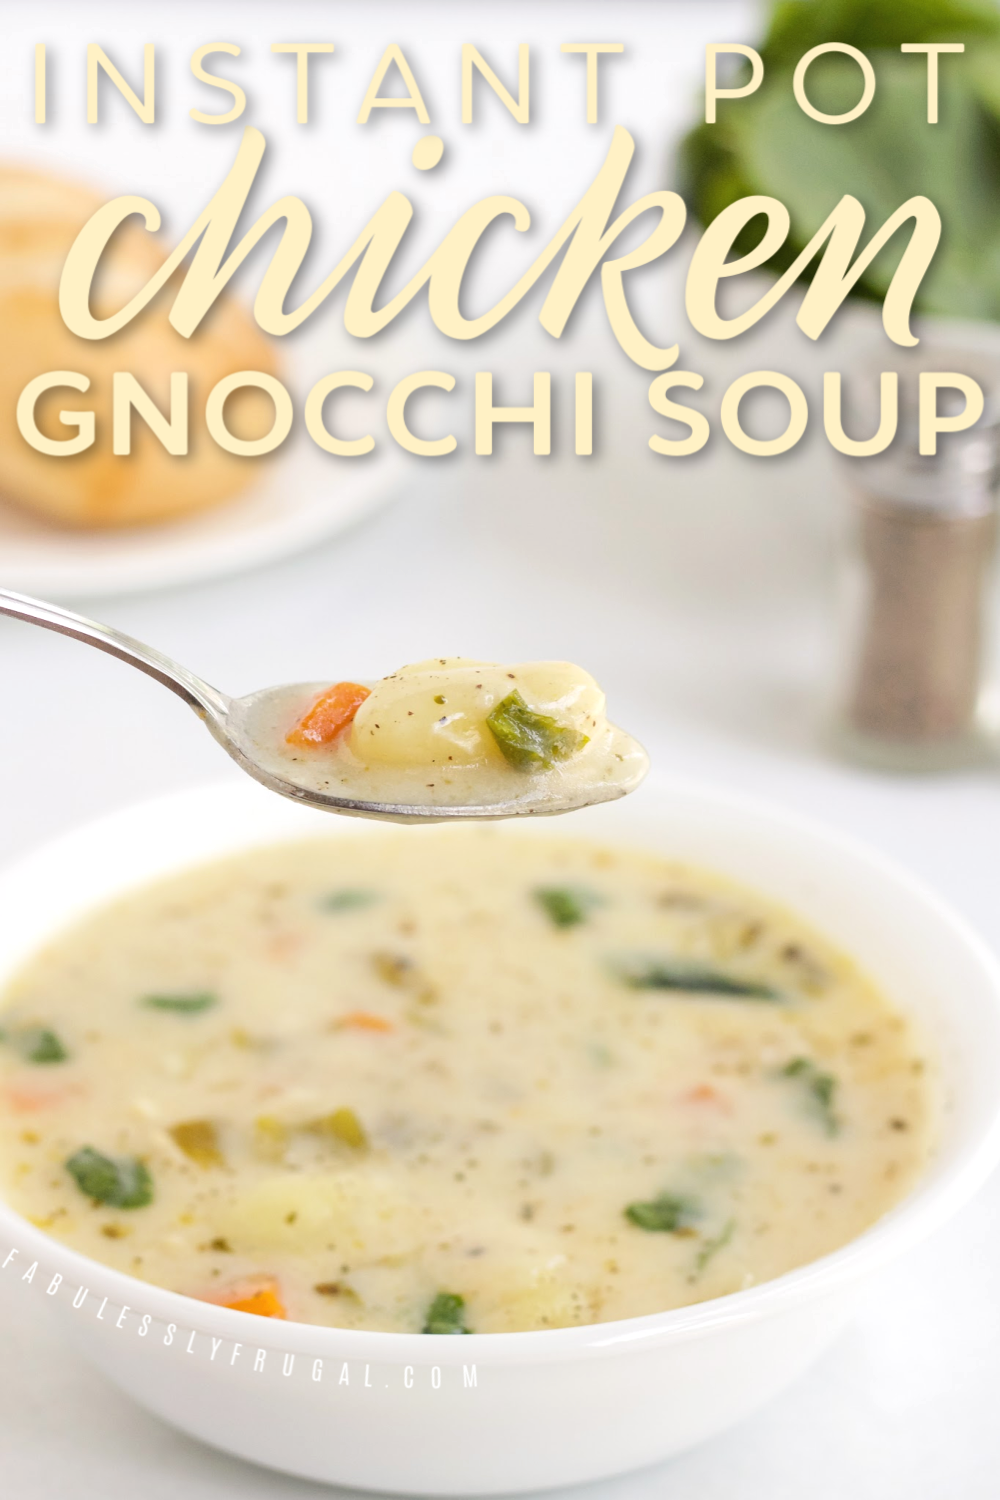 Spoonful of gnocchi soup